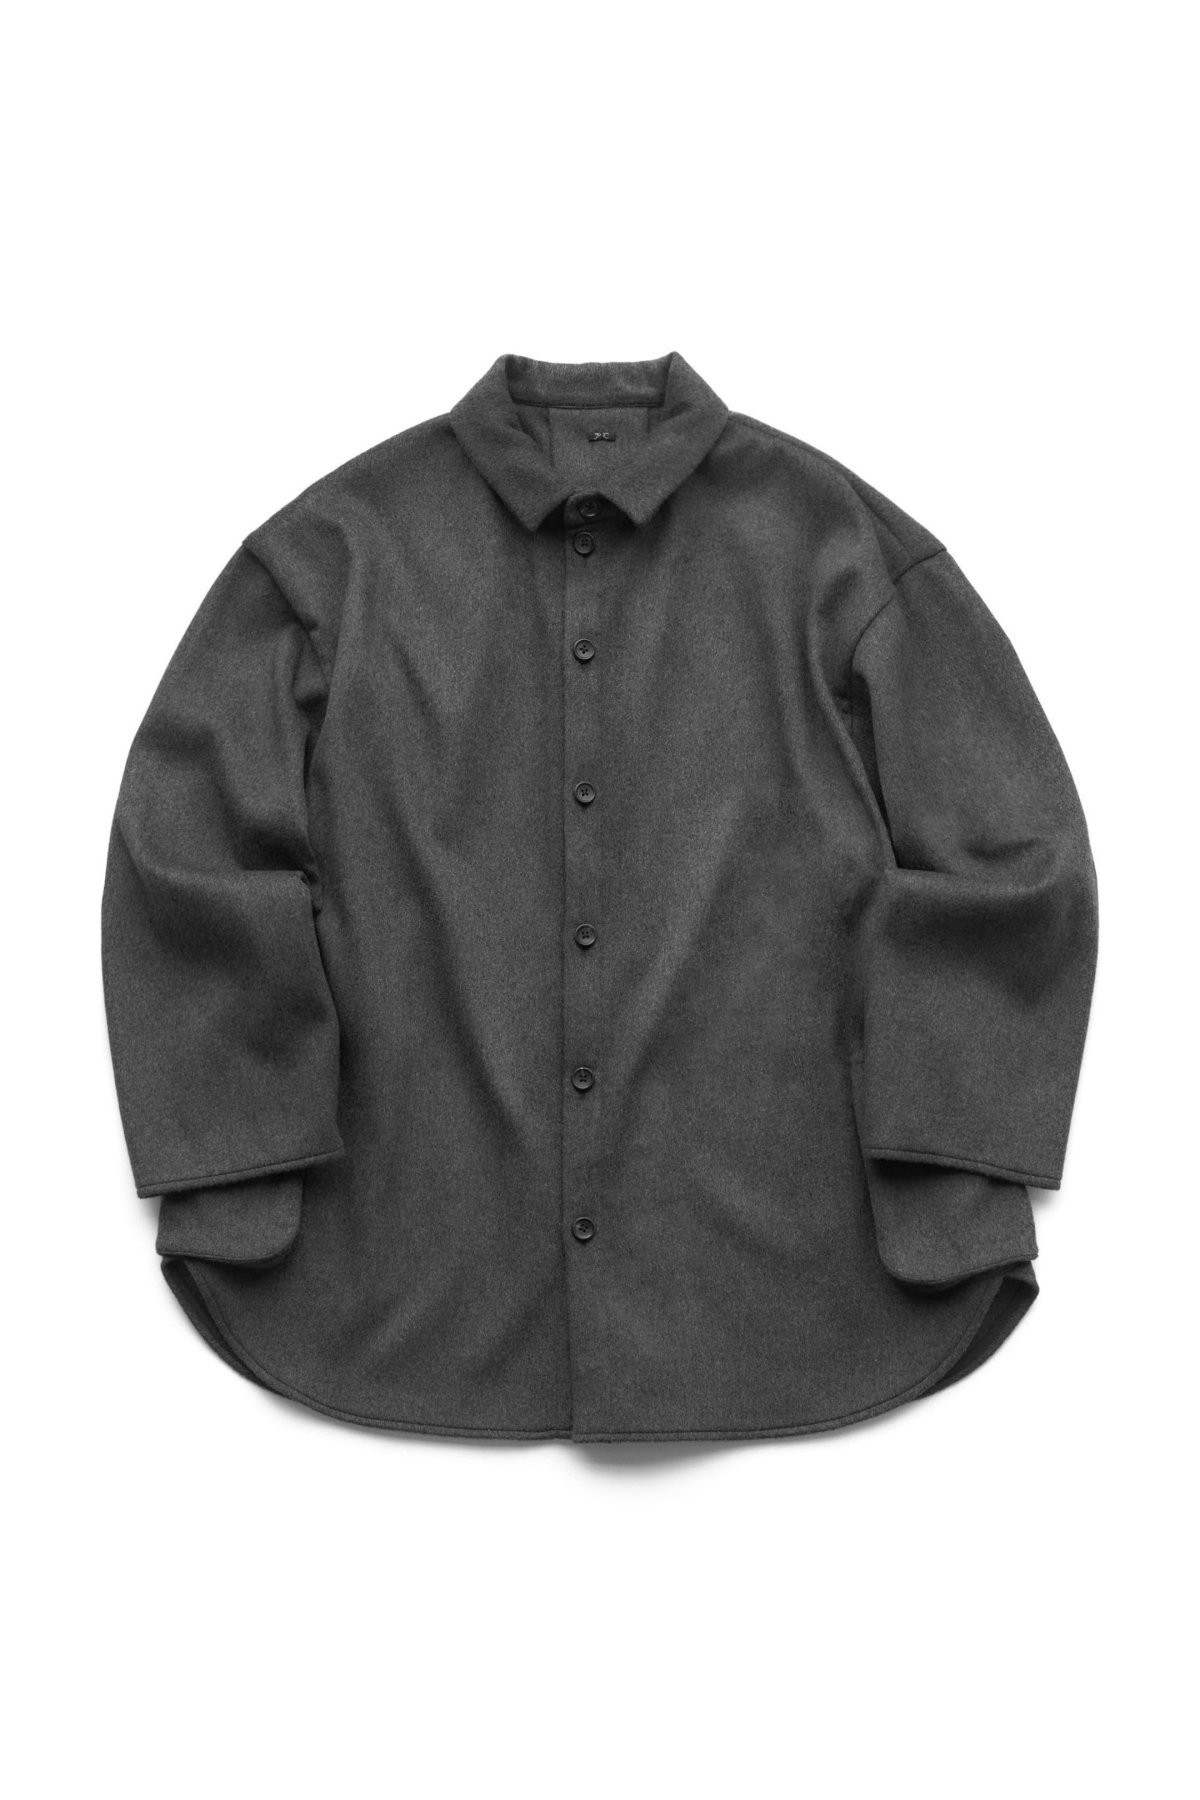 Porter Classic - CASHMERE SHIRT JACKET (BABY CASH) - CHARCOAL GRAY ...